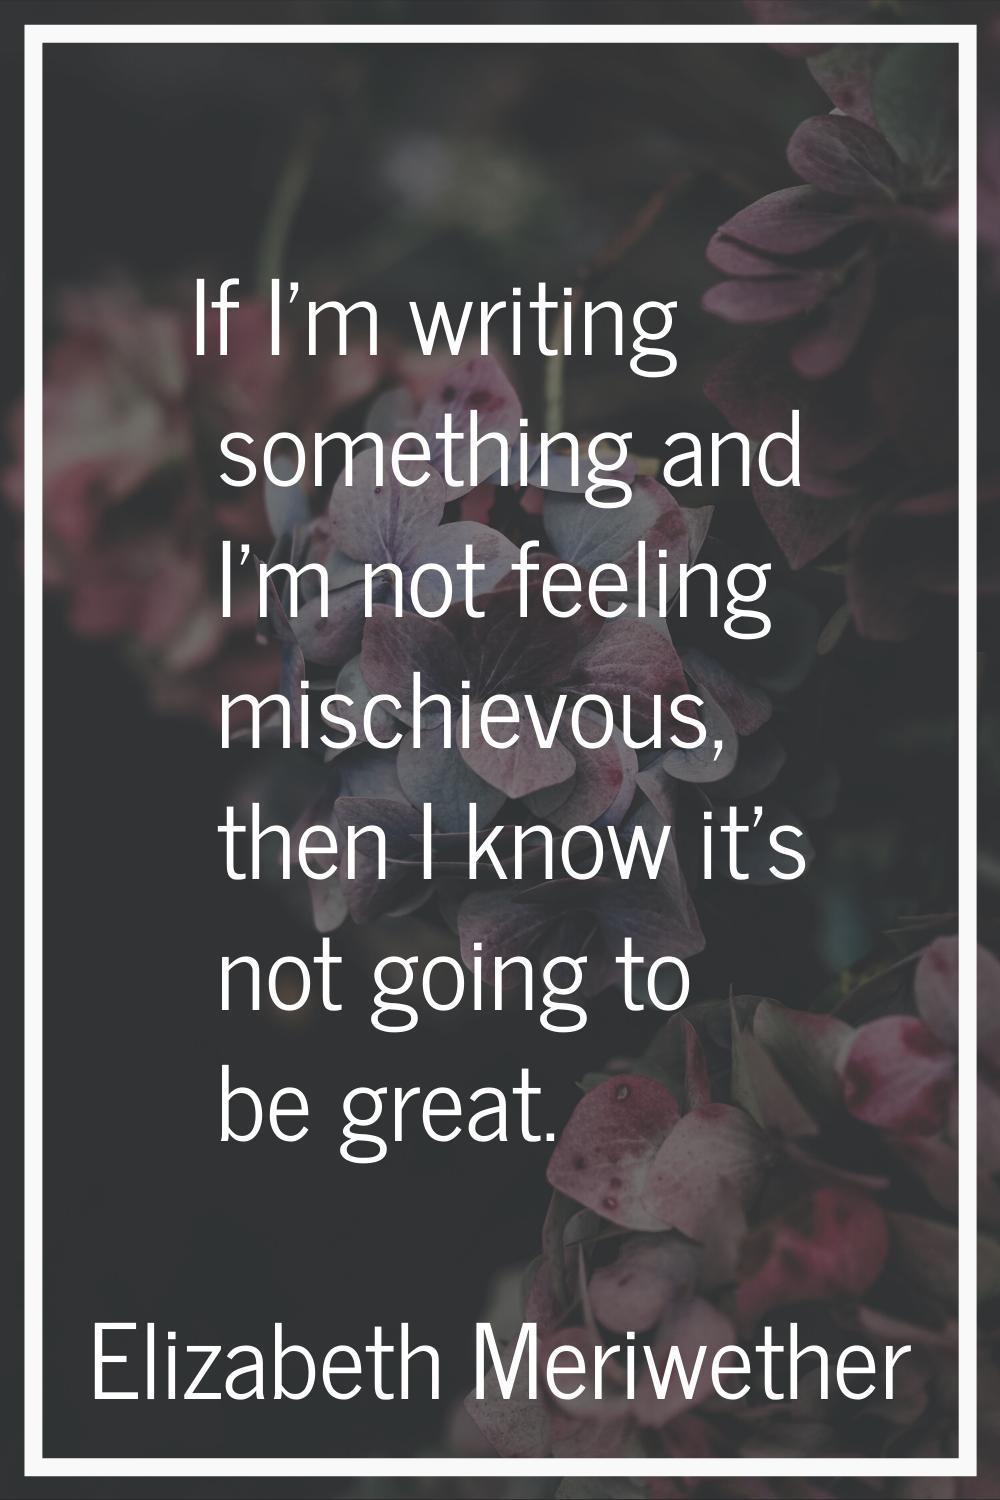 If I'm writing something and I'm not feeling mischievous, then I know it's not going to be great.